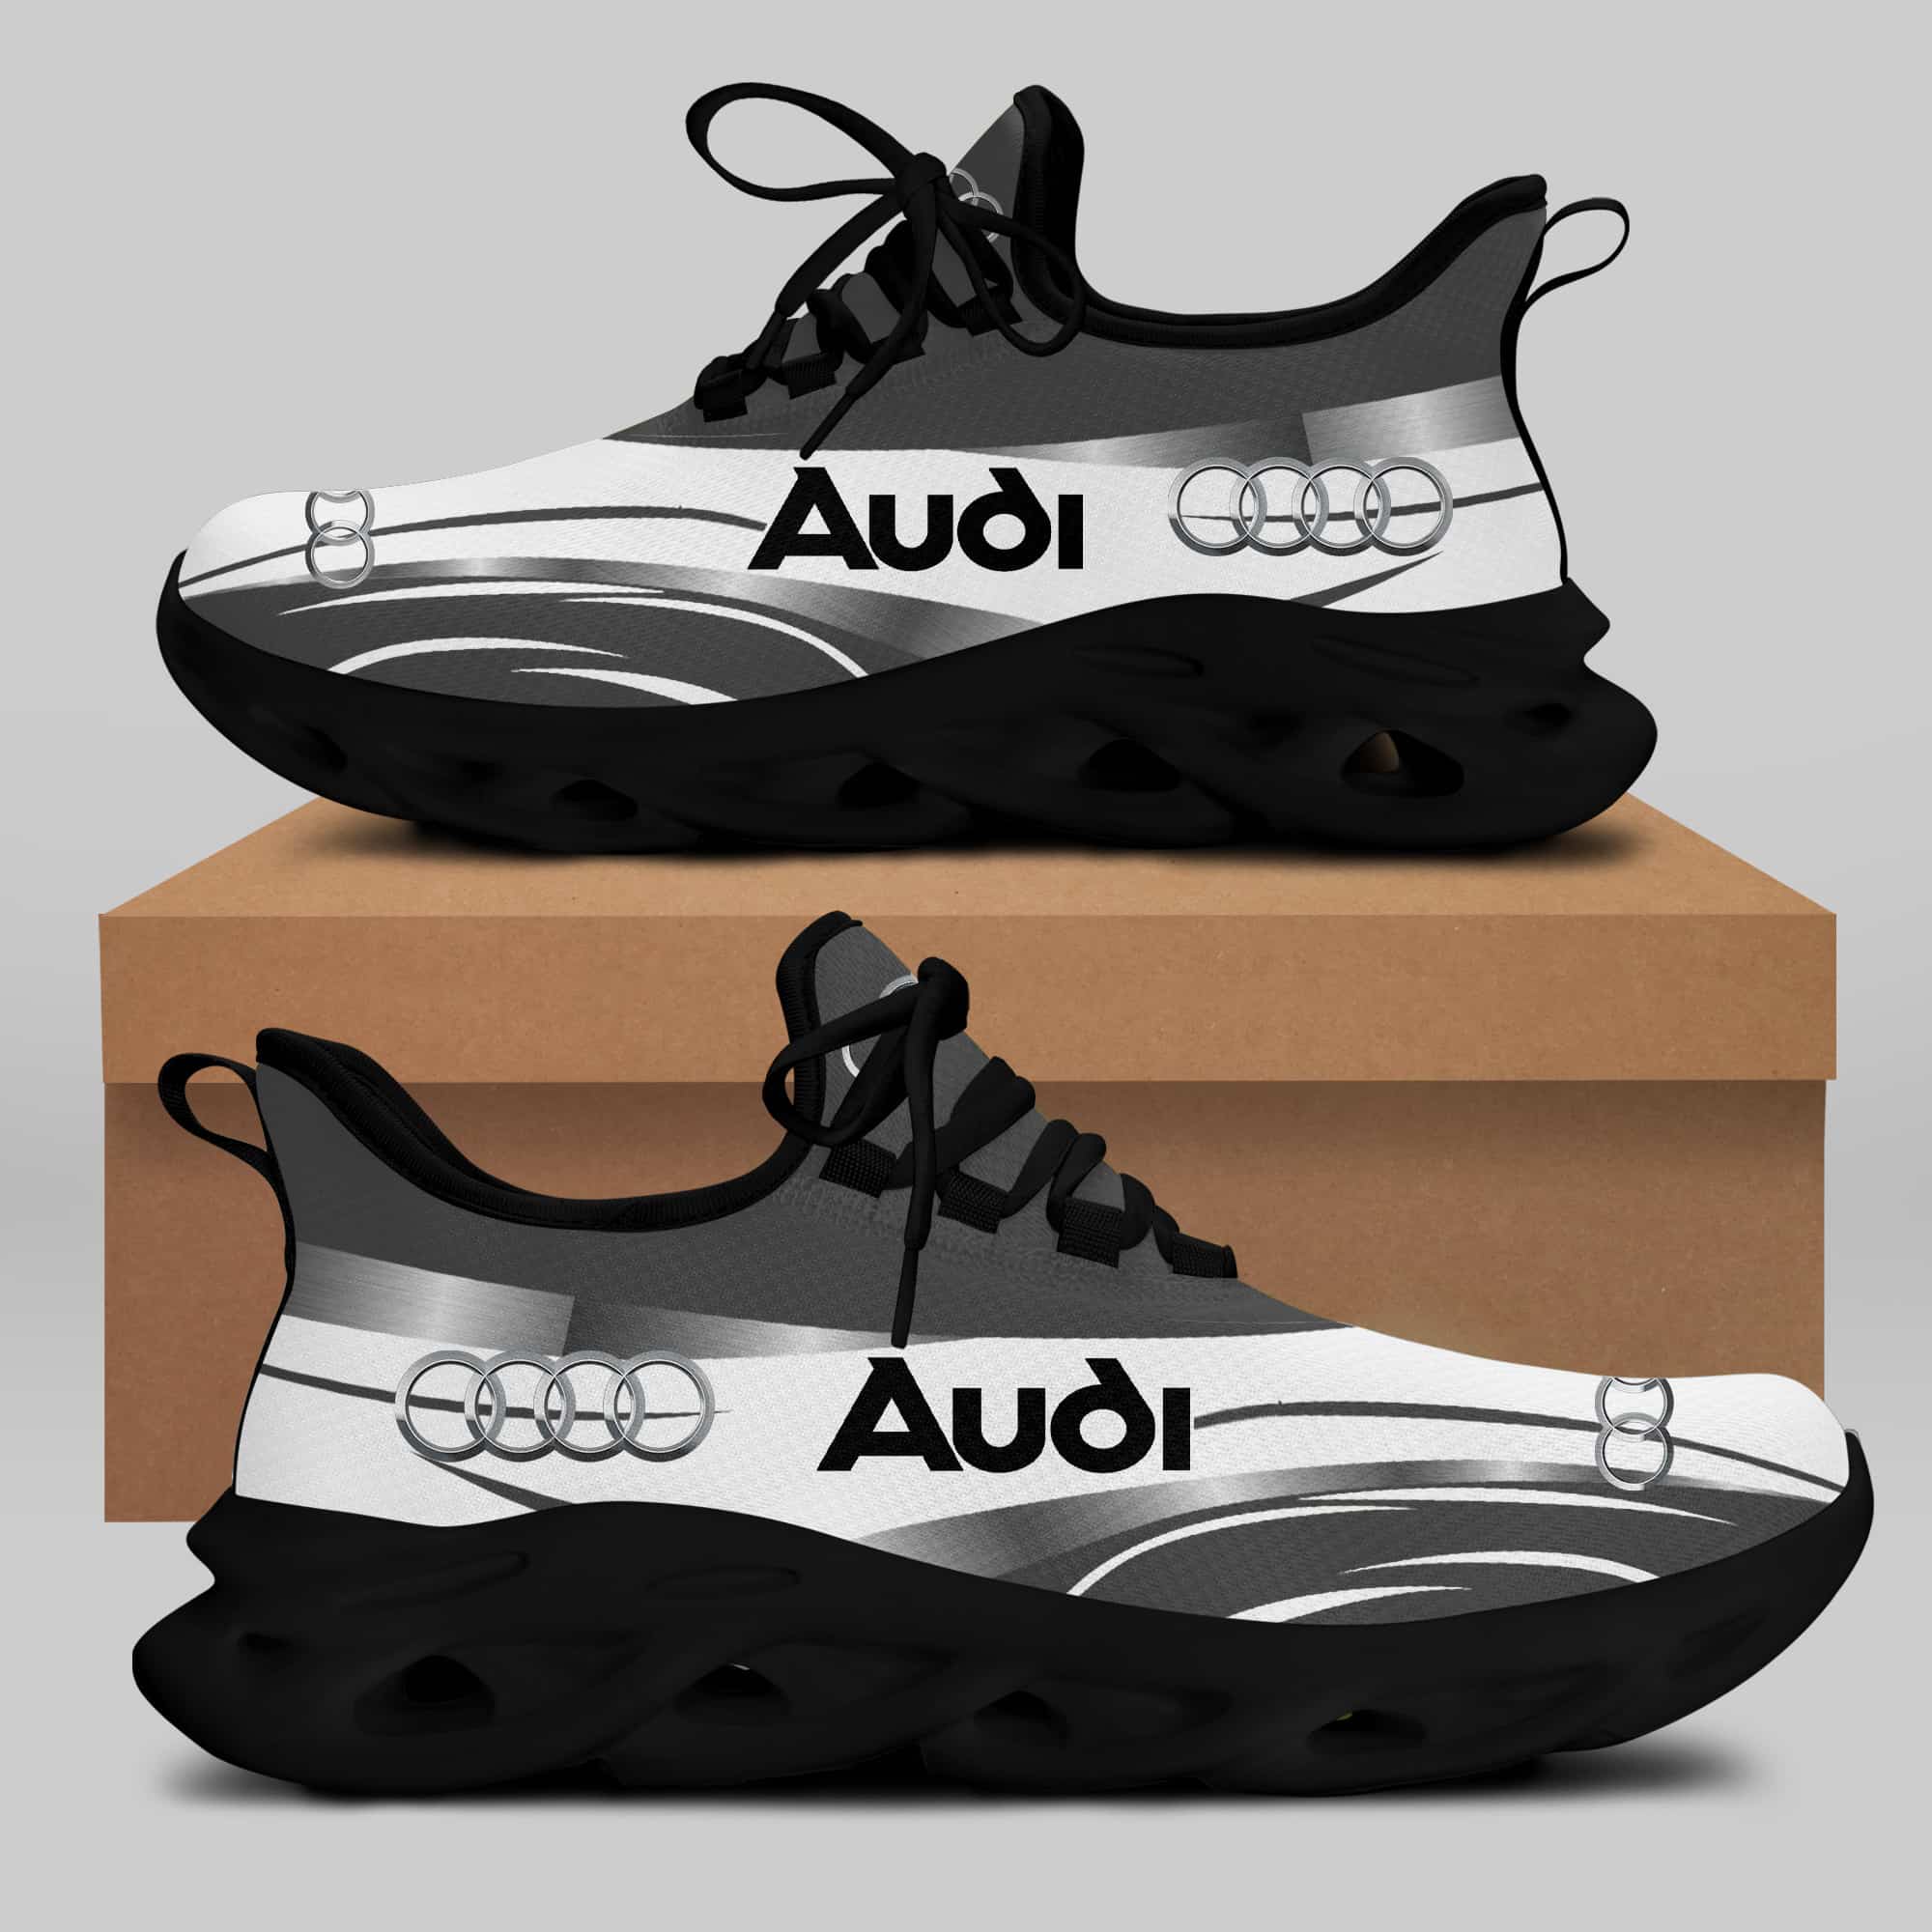 Audi Sport Running Shoes Max Soul Shoes Sneakers Ver 59 1